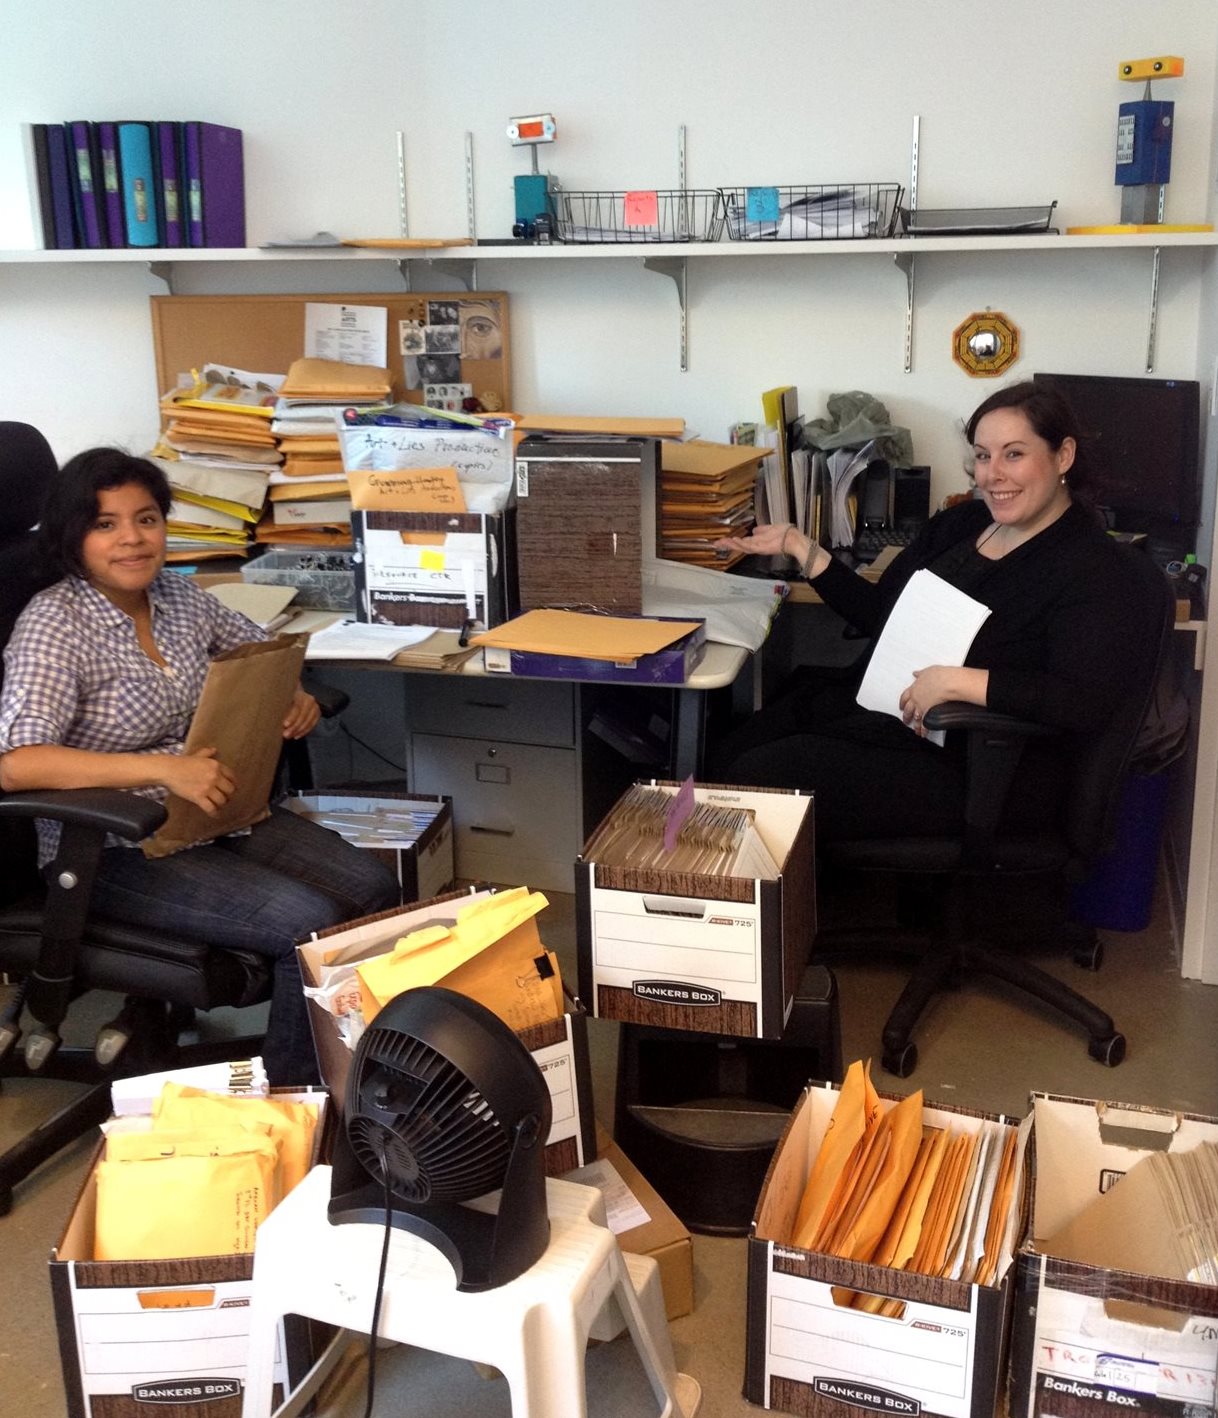 Former grants assistants Norma Garcia and Rachel Feldbloom are surrounded by boxes full of paper applications